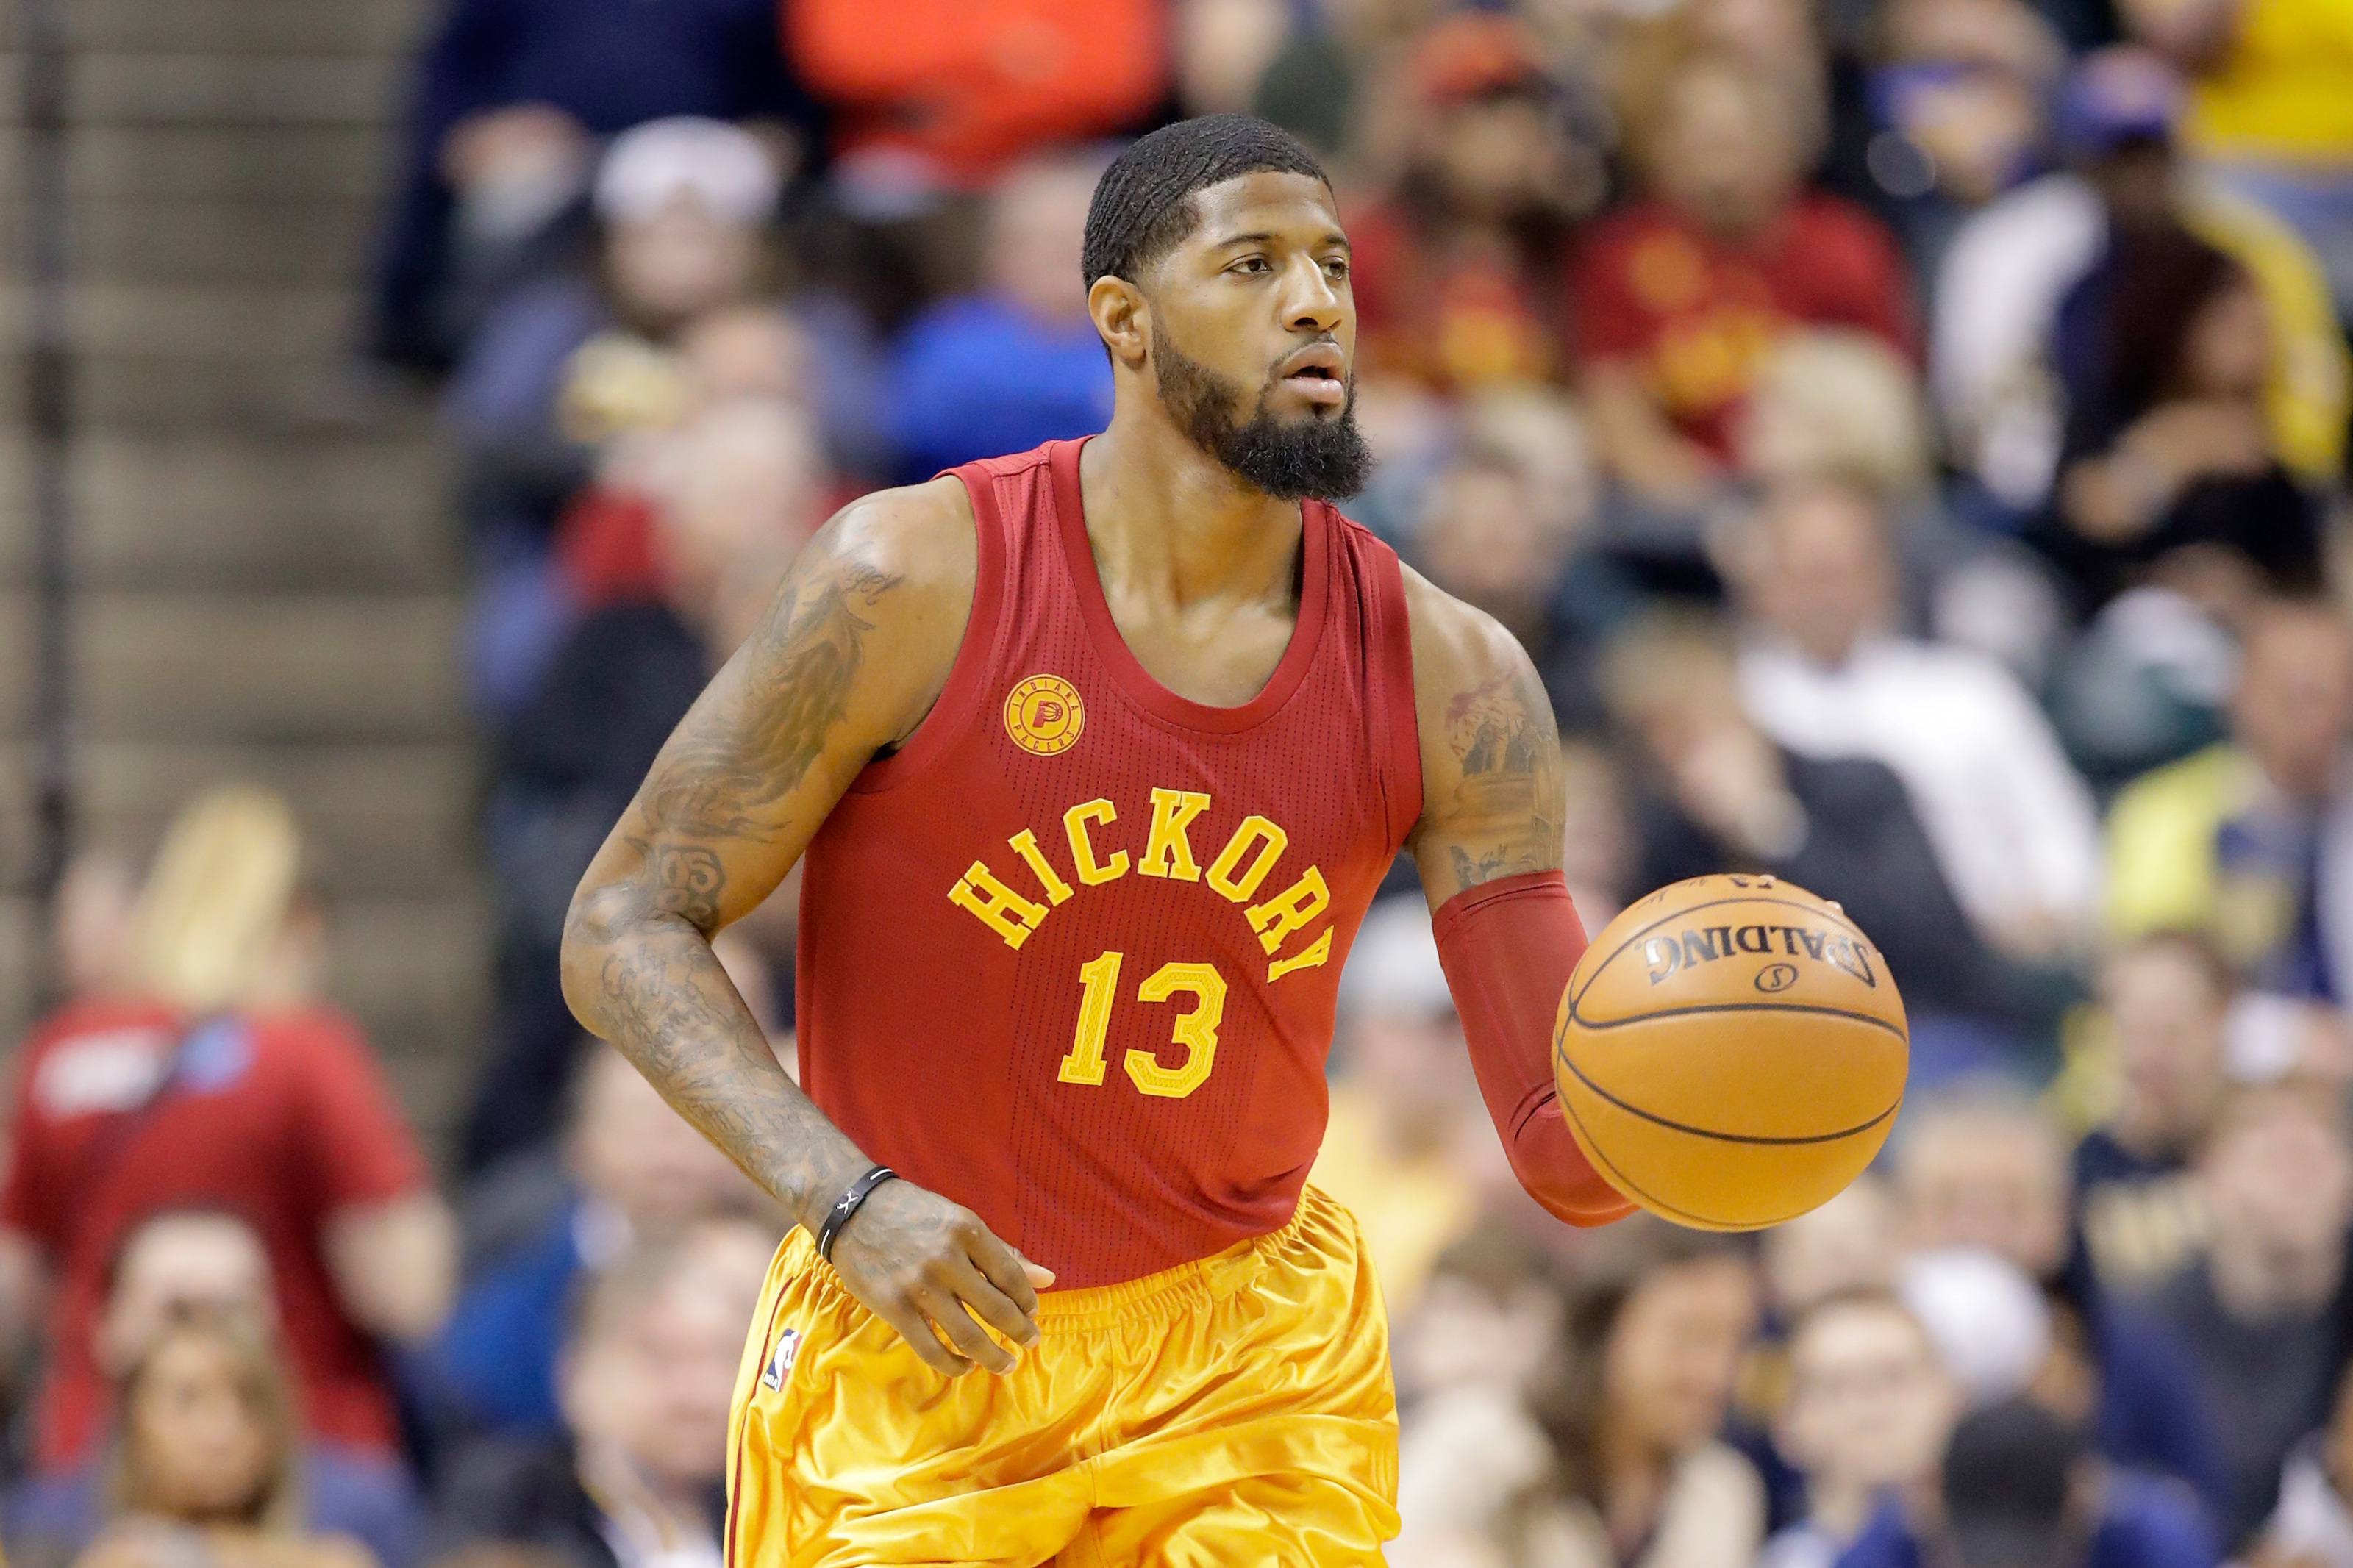 Indiana Pacers Trade Rumors: Team Not Looking to Shop Paul George